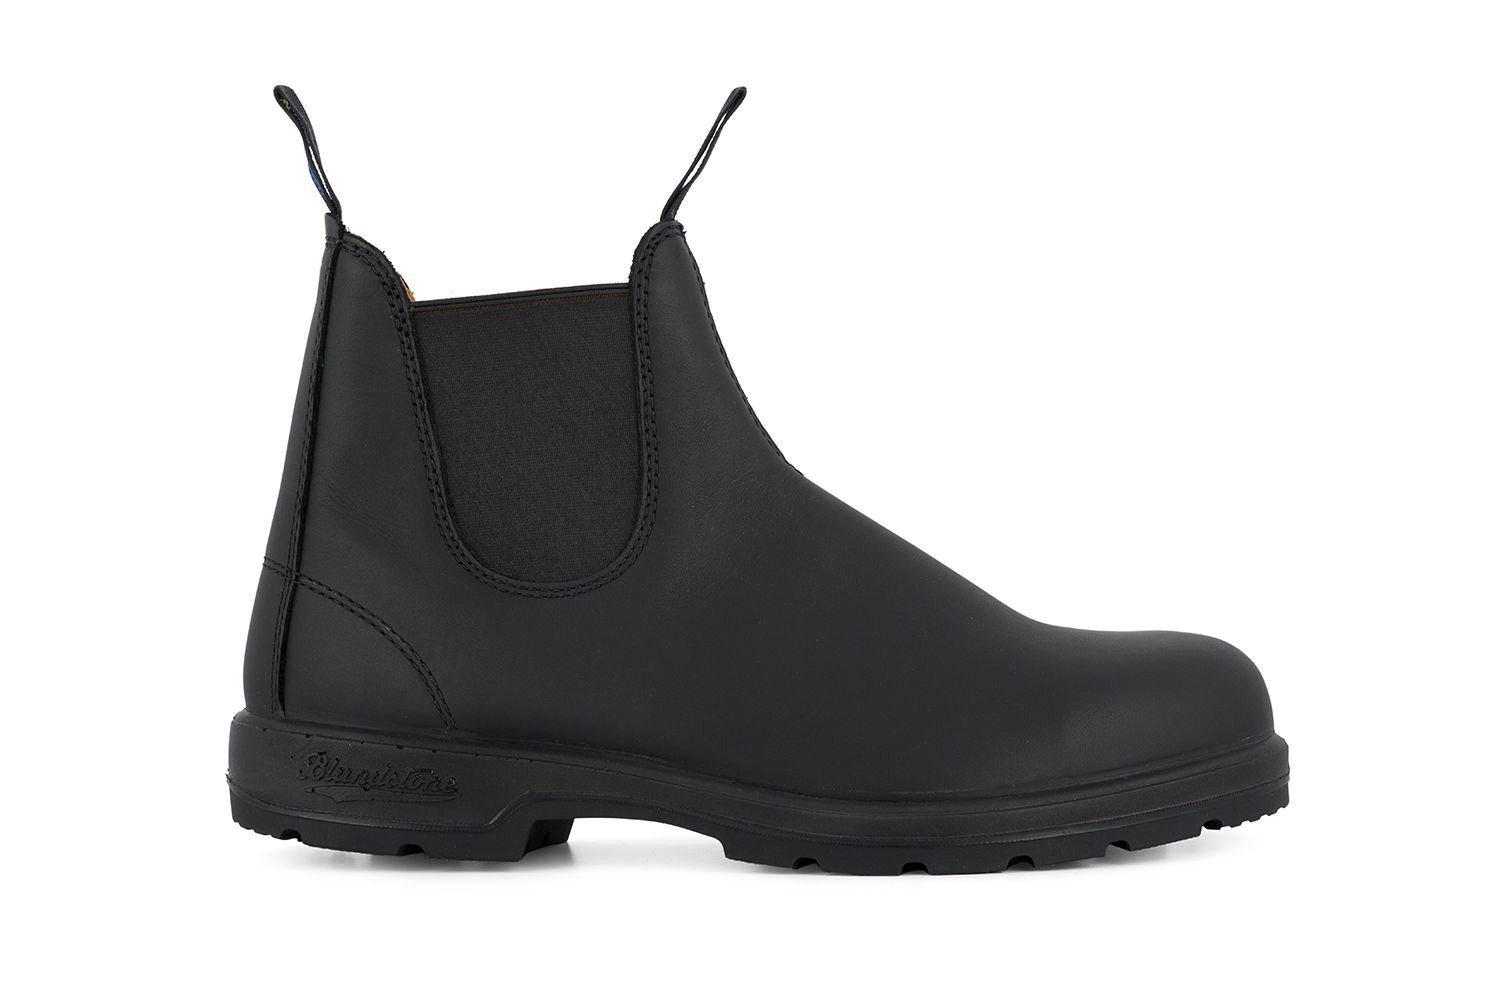 Blundstone #566 Thermal Chelsea Boot